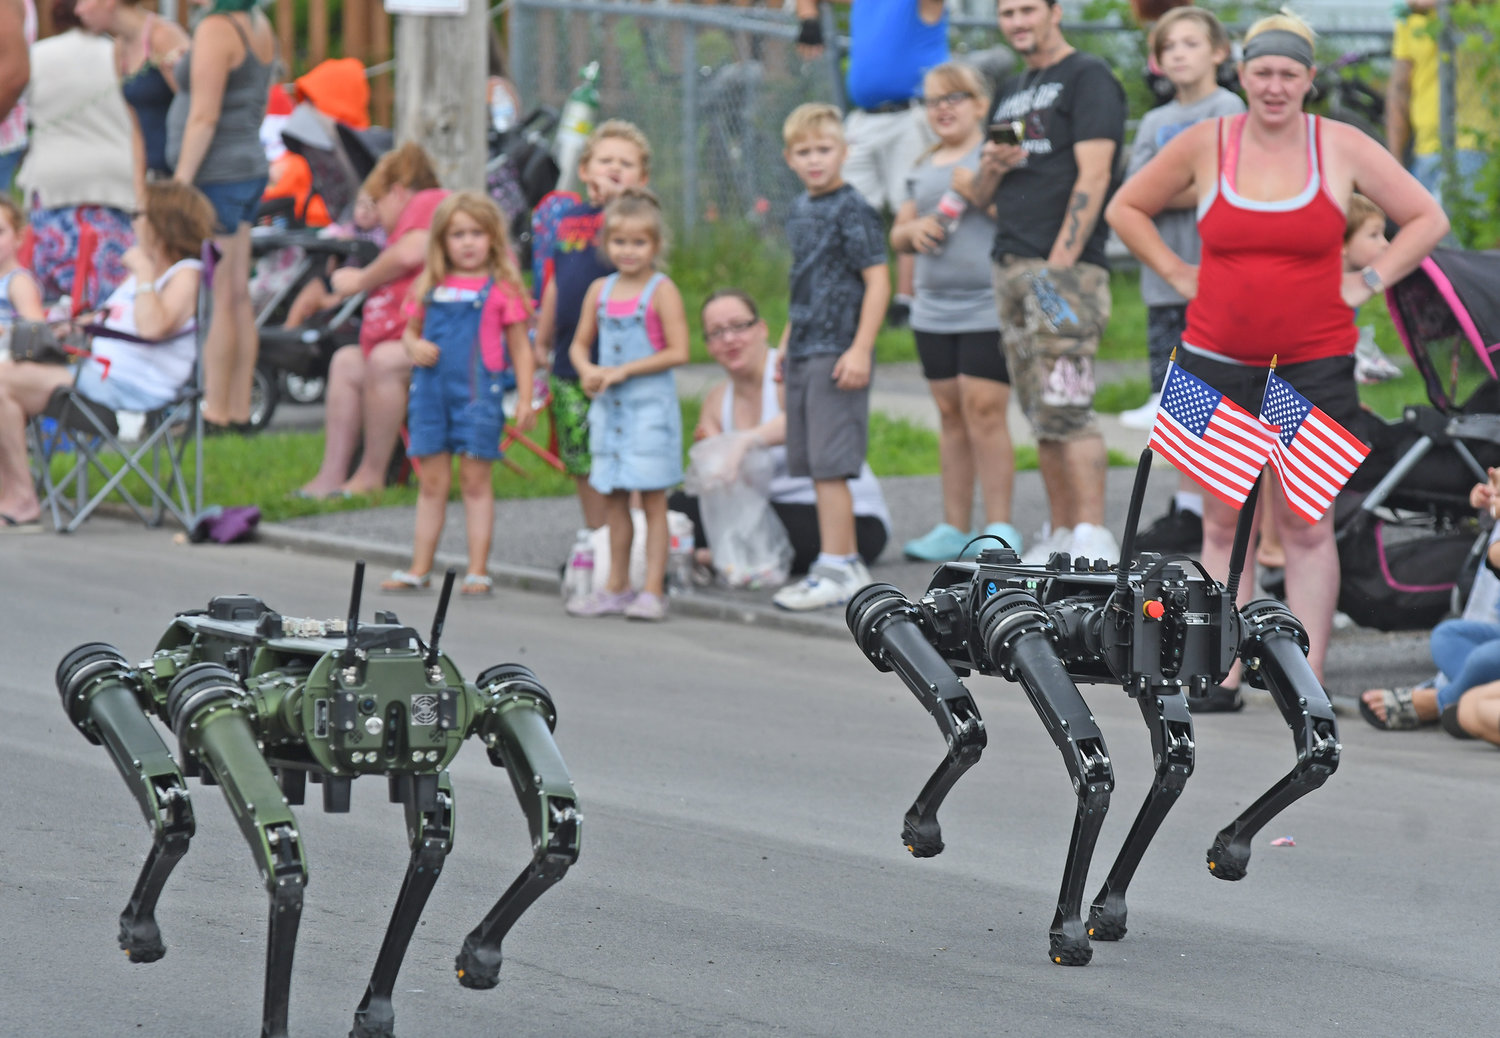 Robot “dogs” go for a walk during the Honor America Days parade on Saturday. Pleasant temperatures and a wide variety of participants helped make the event a rousing success, organizers said.